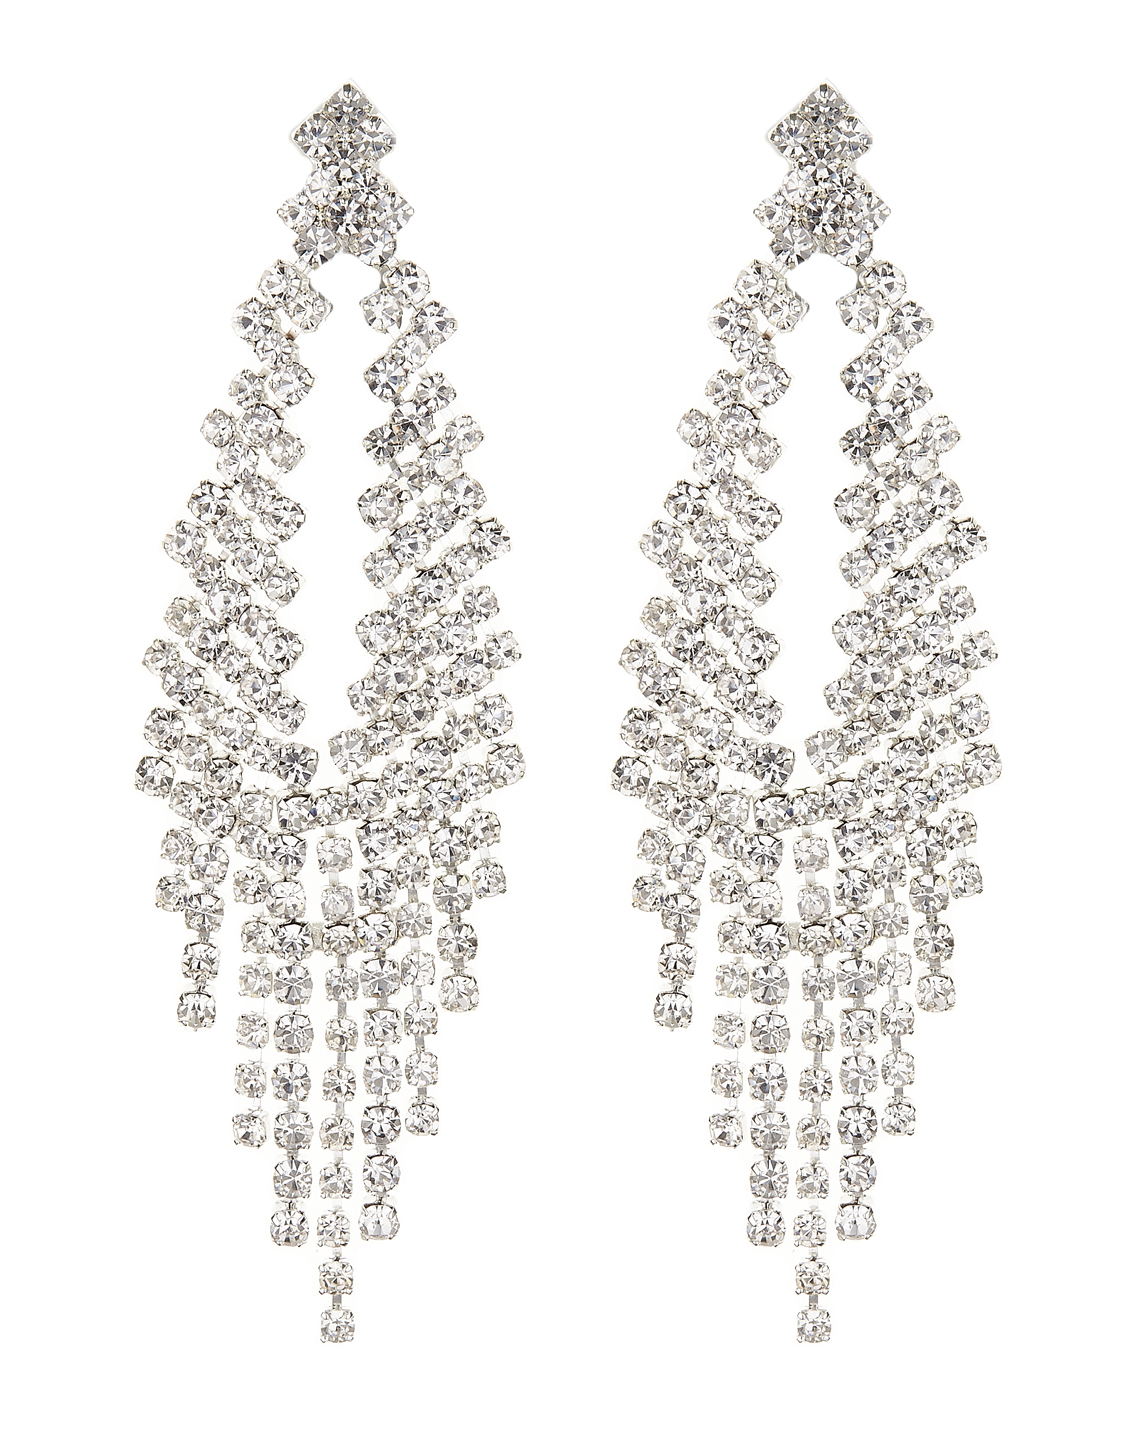 Clip On Earrings - Caca S - silver chandelier earring with clear crystals